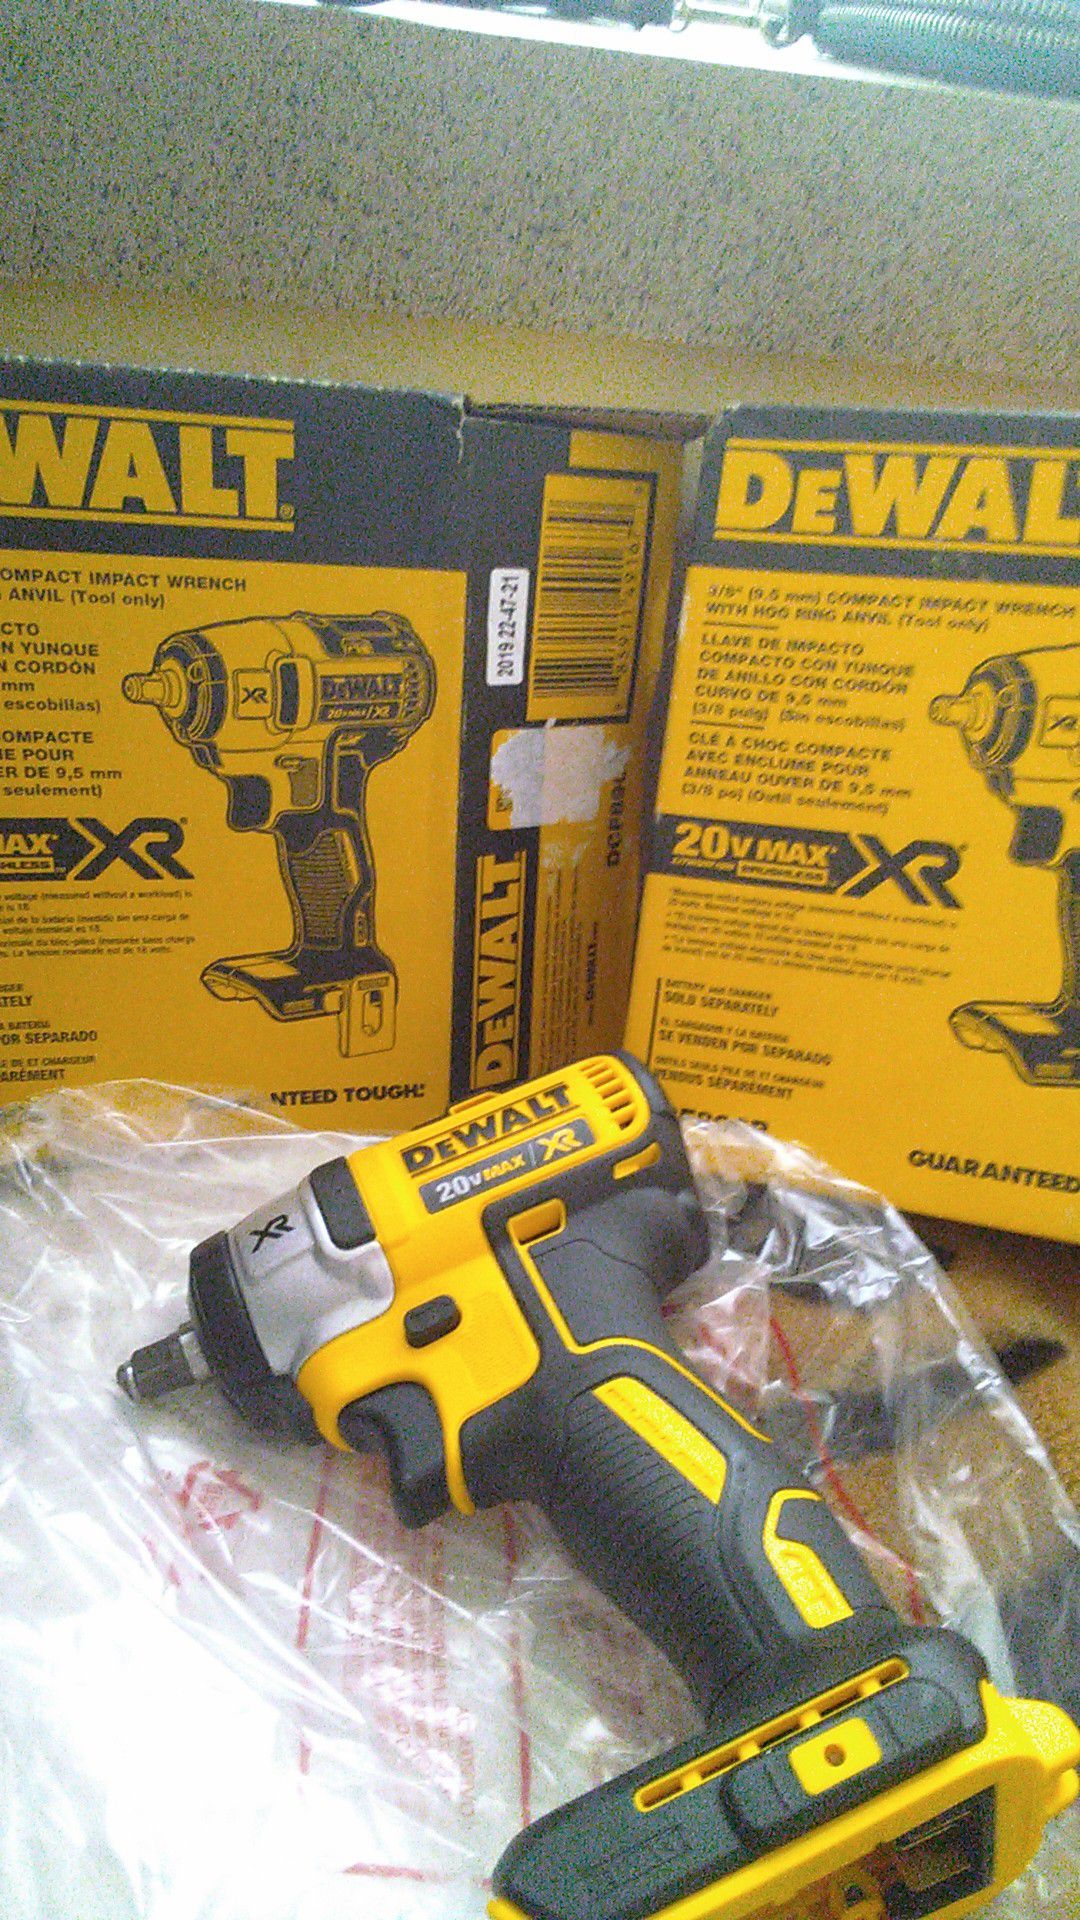 DeWalt 3/8 compact impact wrench w/ ring anvil